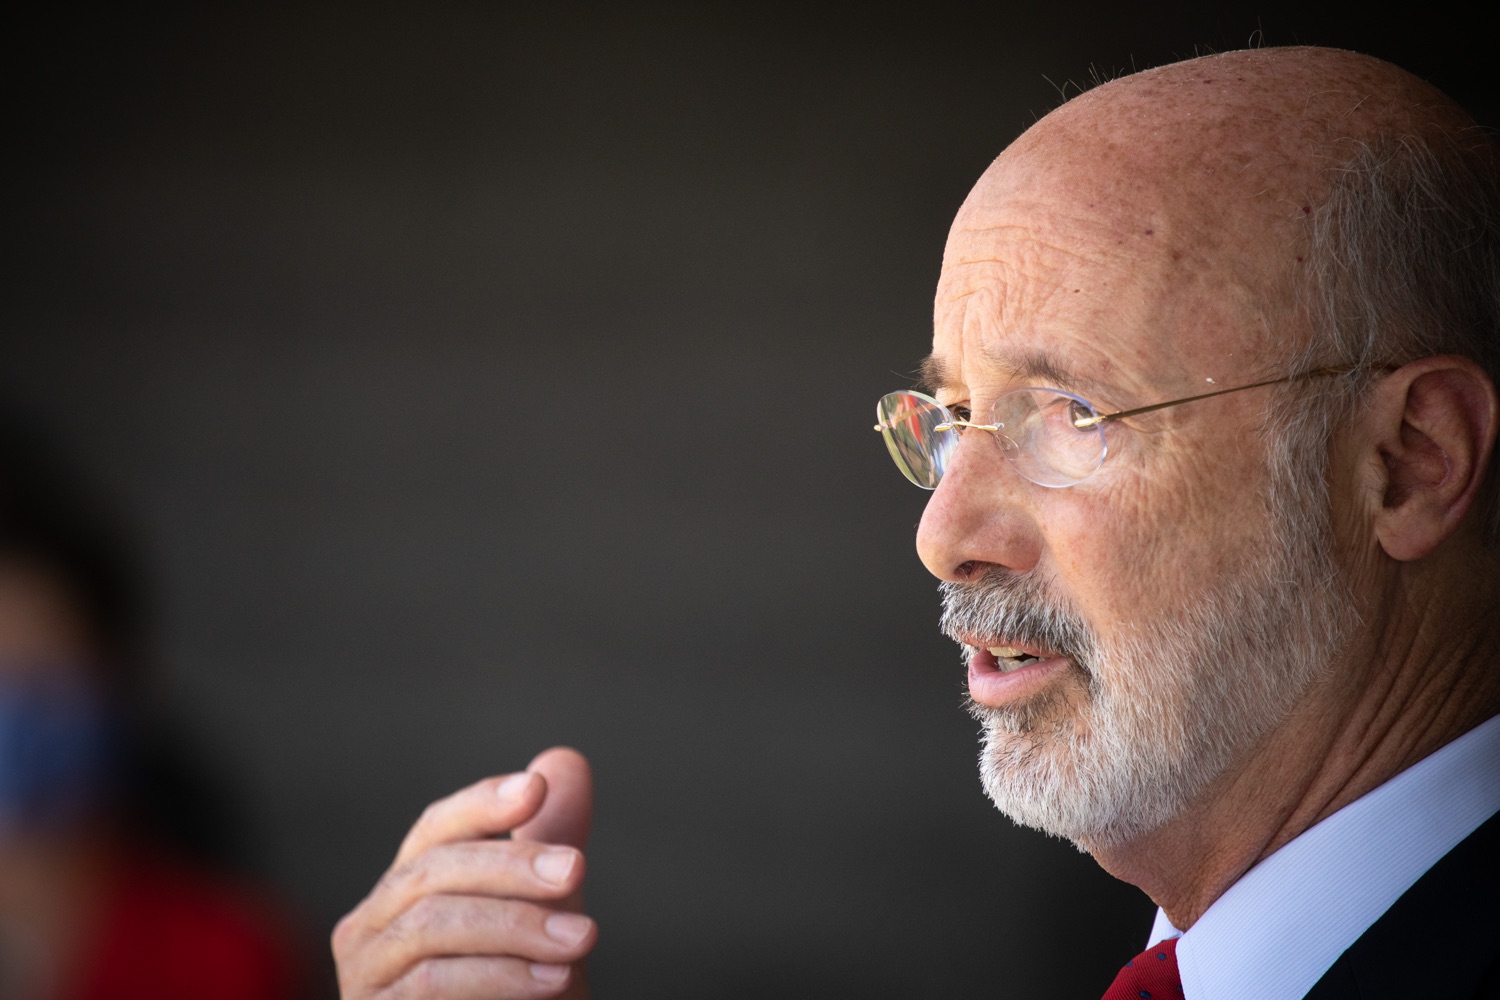 Pennsylvania Governor Tom Wolf speaking with the press.  Governor Tom Wolf visited the child care center at PSECU headquarters in Harrisburg today to announce $53 million in additional financial support for child care providers that have suffered during COVID-19.  Harrisburg, PA  July 6, 2020..<br><a href="https://filesource.amperwave.net/commonwealthofpa/photo/18143_gov_cares_dz_20.jpg" target="_blank">⇣ Download Photo</a>